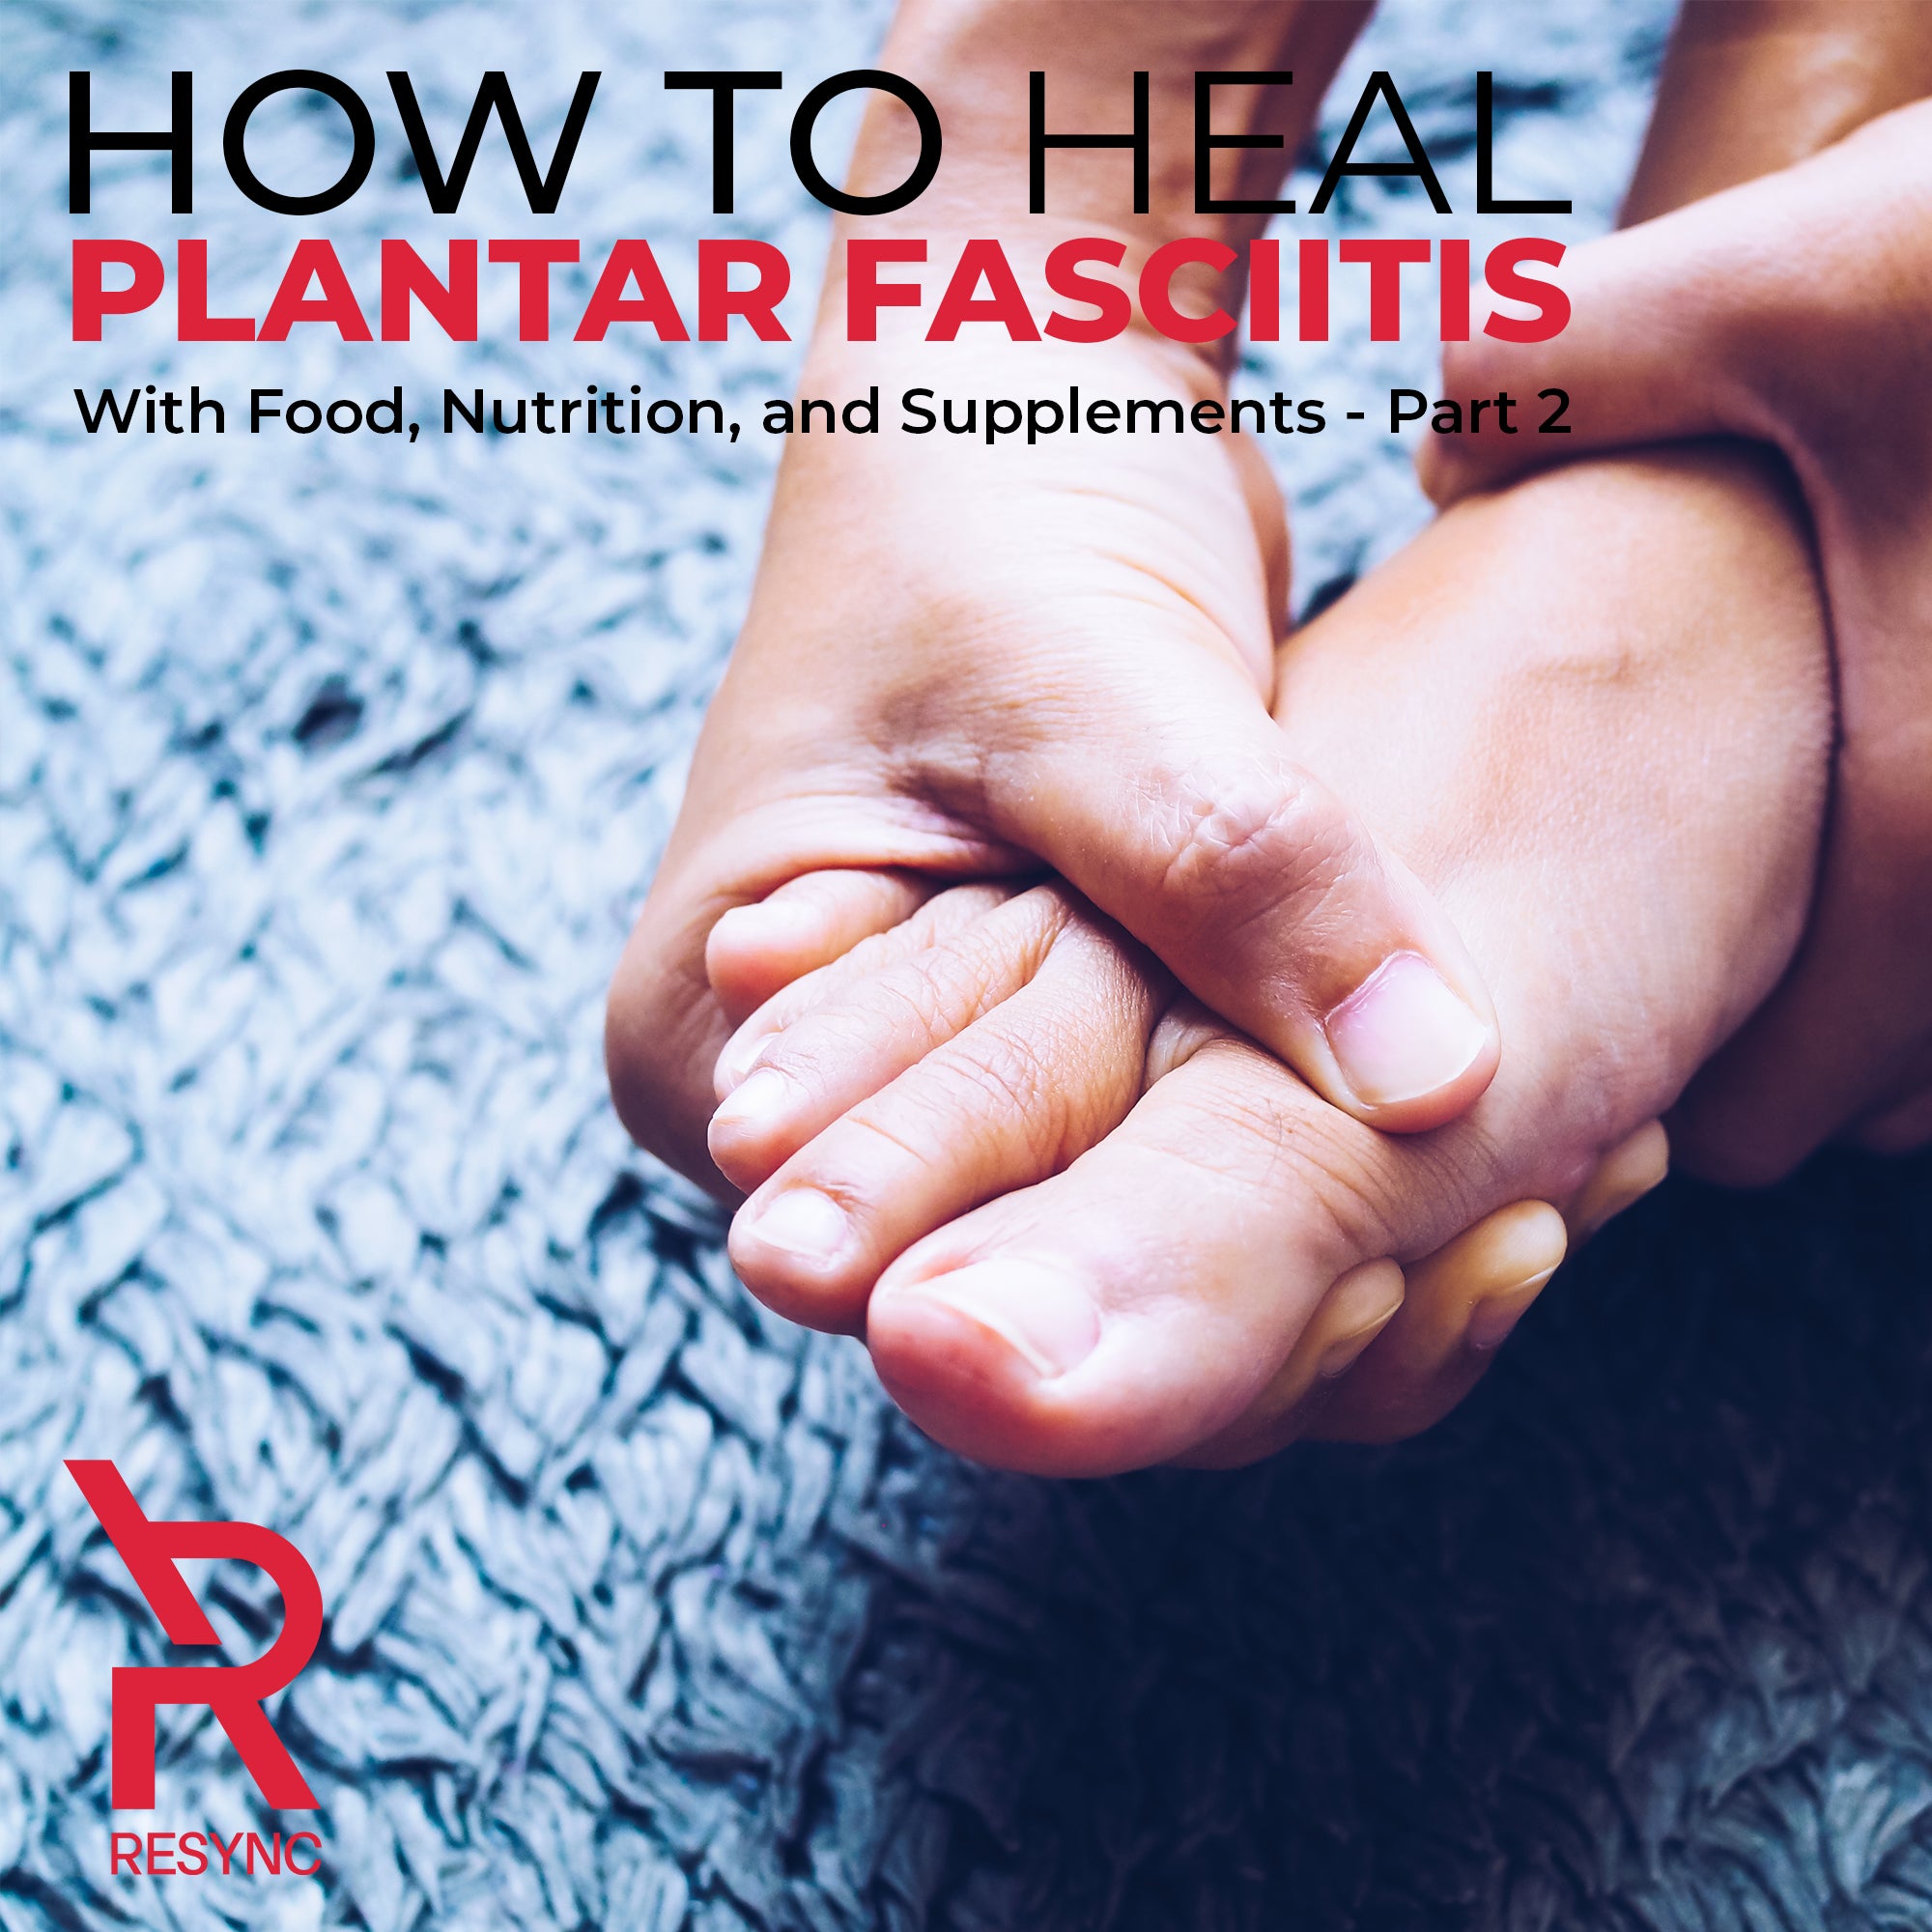 How To Heal Plantar Fasciitis With Food, Nutrition, and Supplements - Part 2